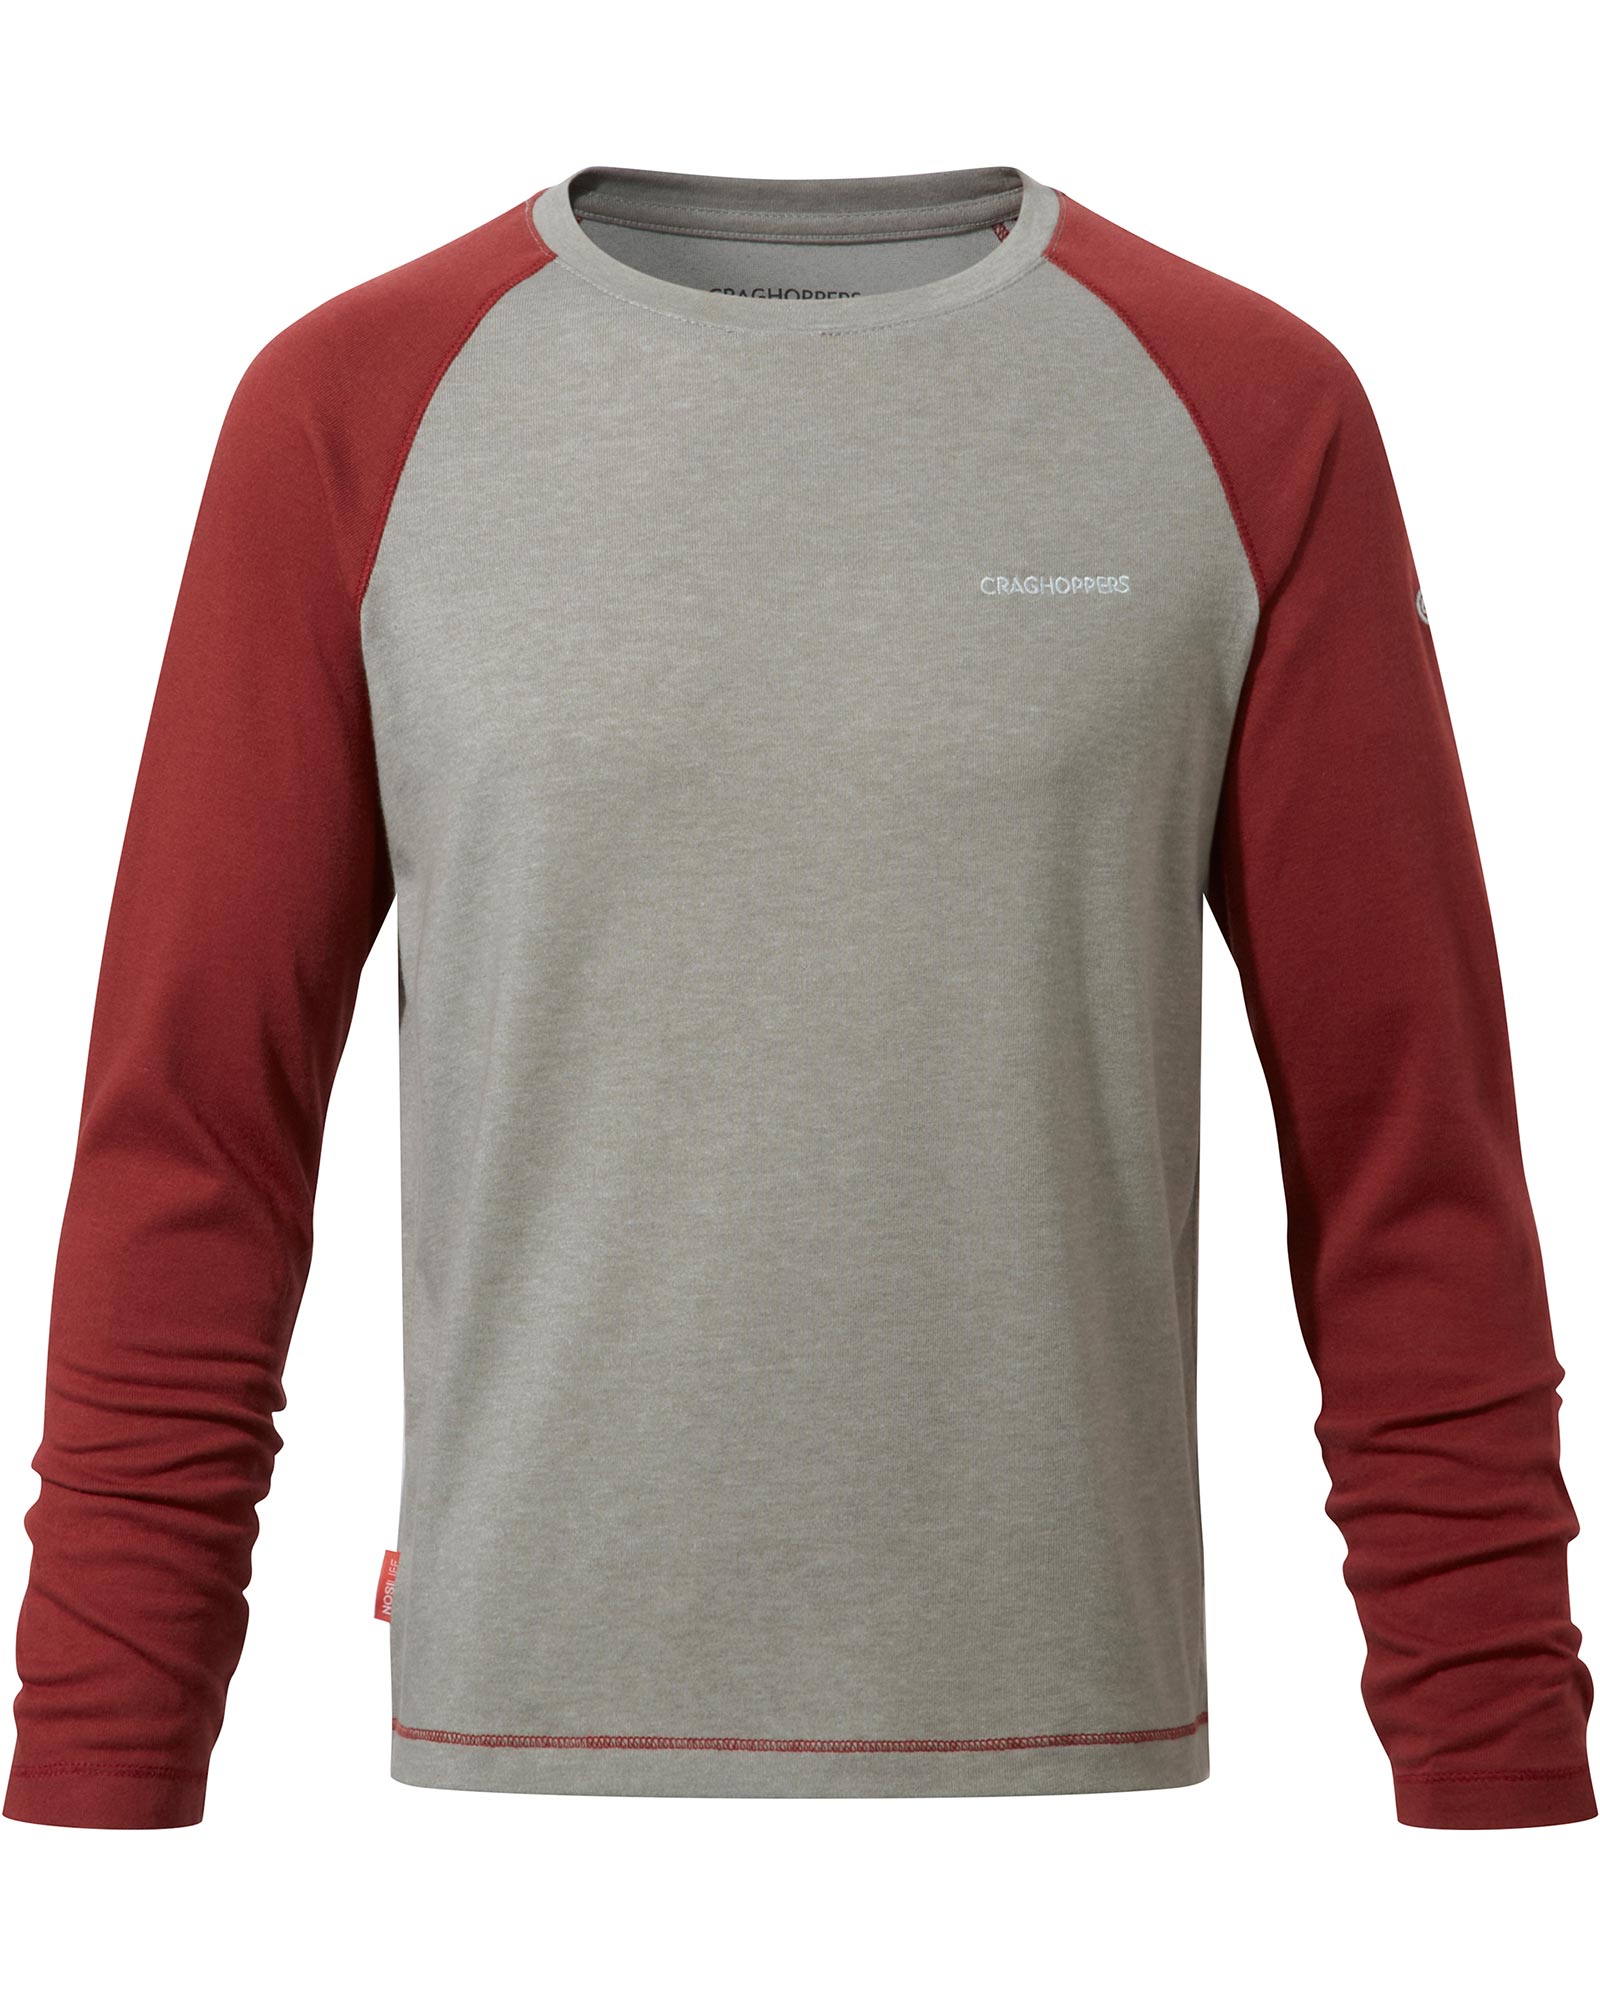 Craghoppers NosiLife Barnaby Kids’ Long Sleeve T Shirt - Carmine Red 11 Years